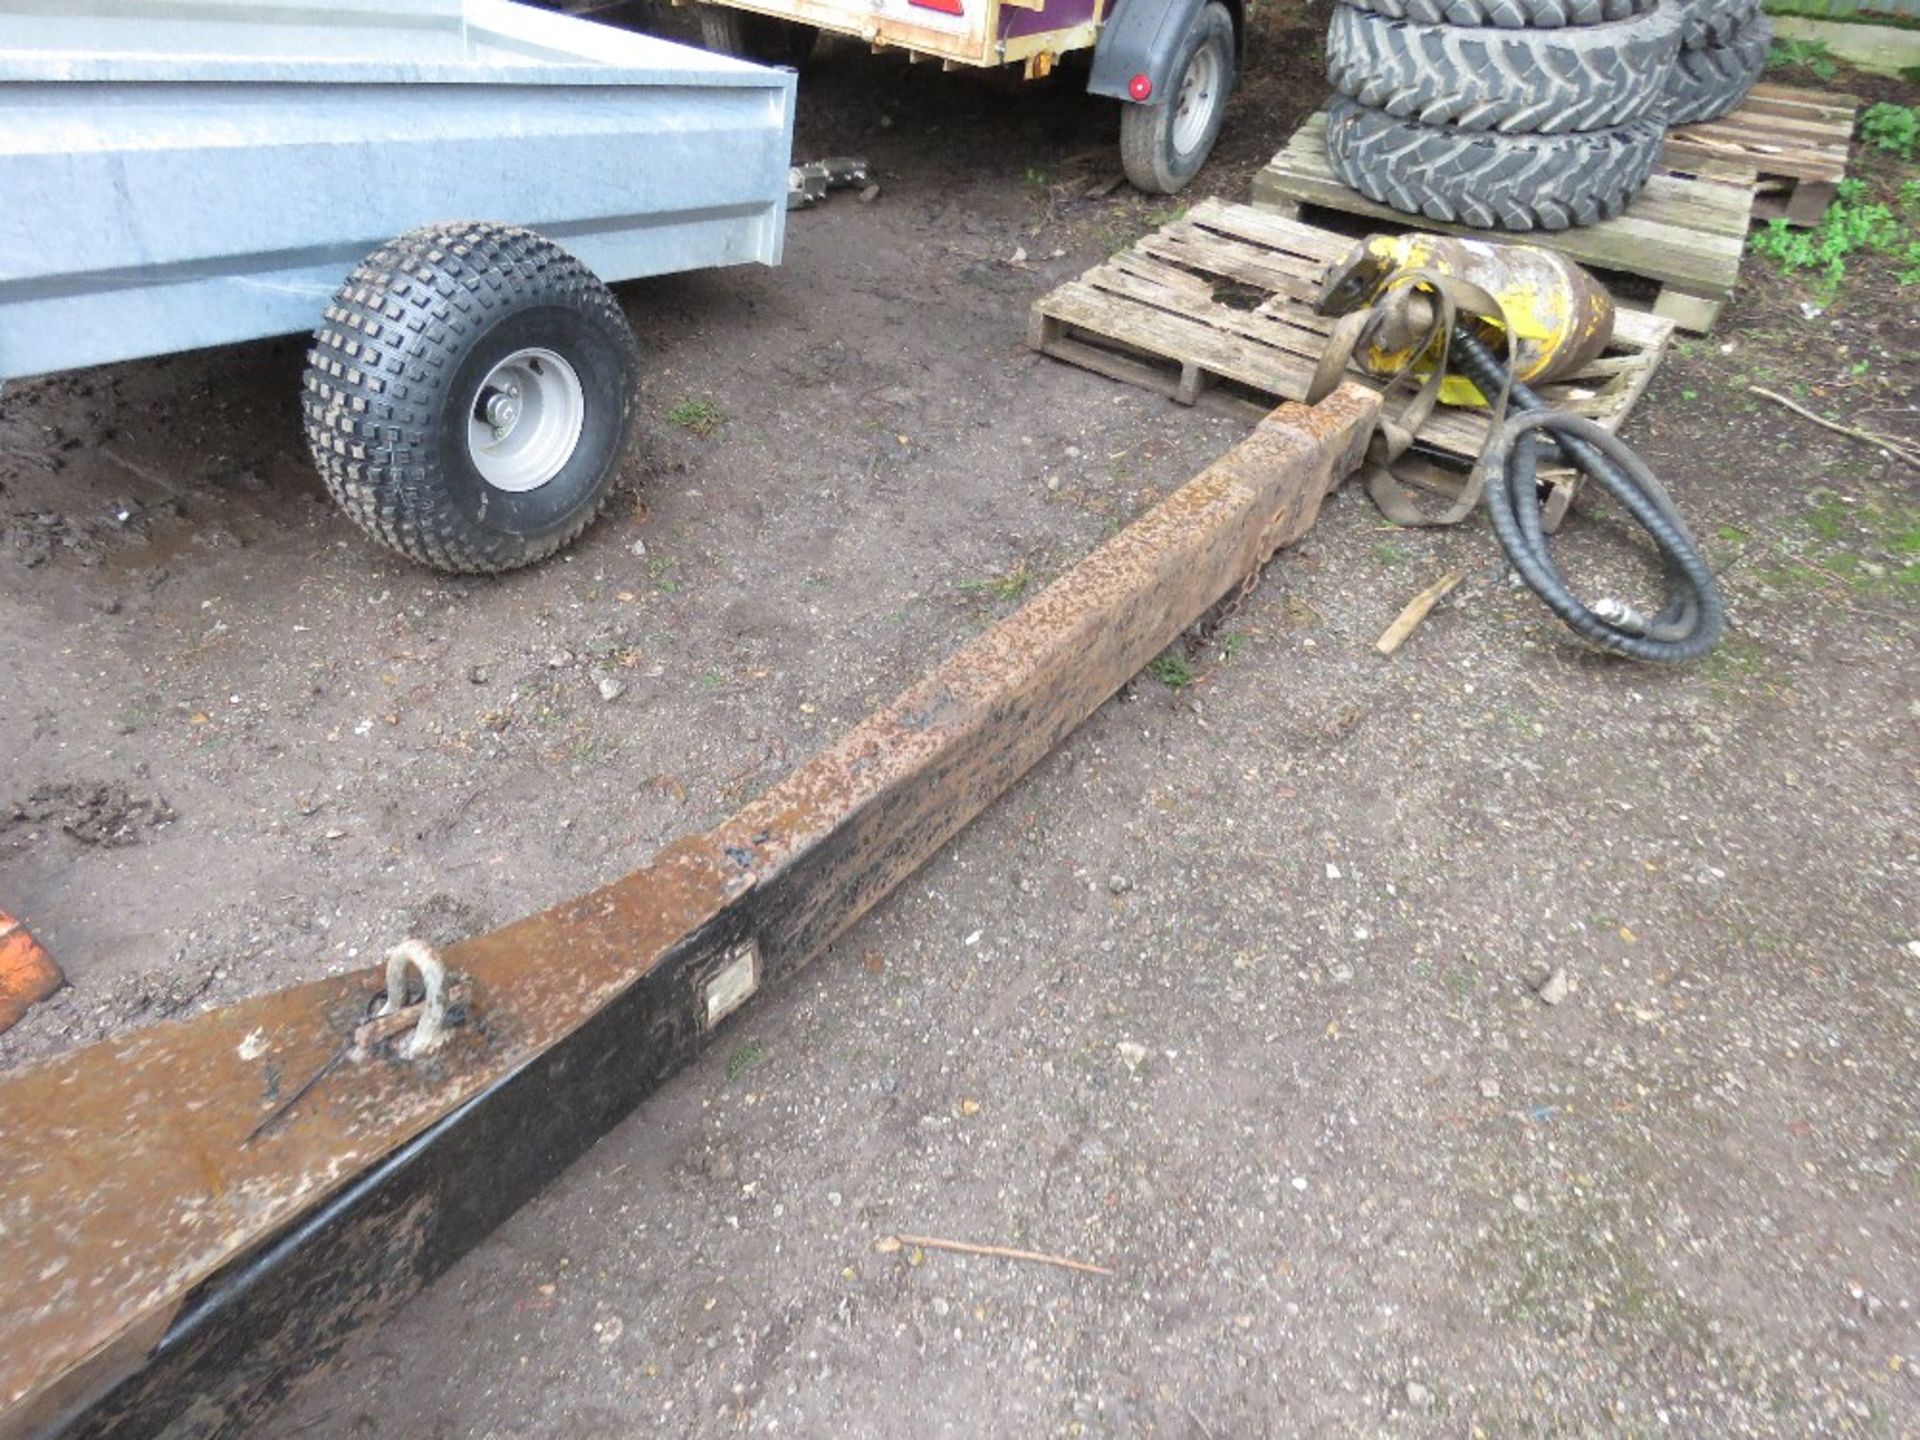 TELESCOPIC CRANE JIB ATTACHMENT FOR EXCAVATOR, 60MM PINS, 10FT CLOSED LENGTH APPROX. - Image 2 of 5